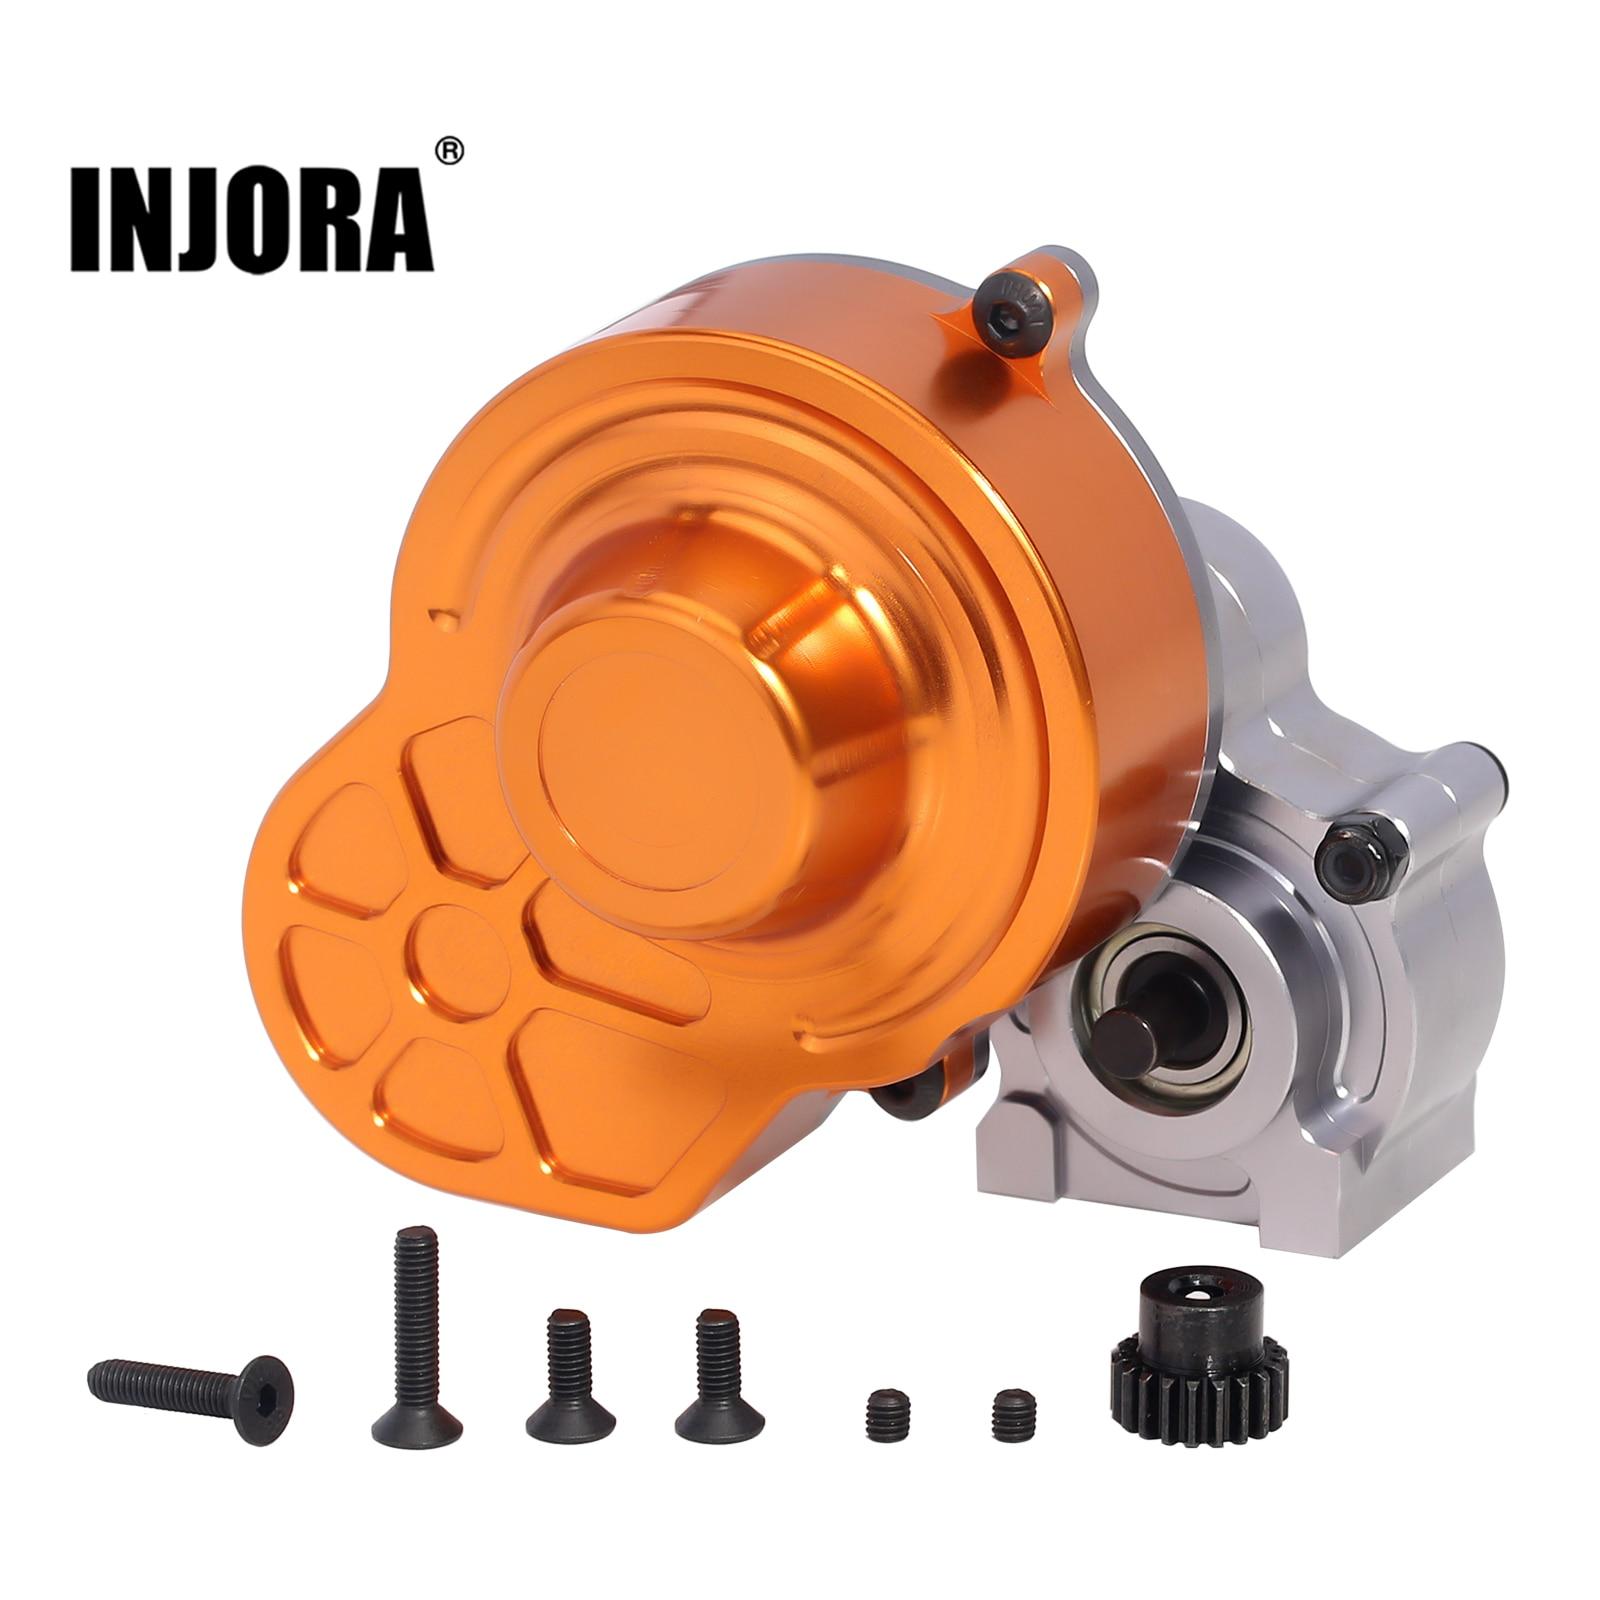 INJORA-Complete-Metal-SCX10-Gearbox-Transmission-with-Gear-for-1-10-RC-Crawler-Car-Axial-SCX10.jpg